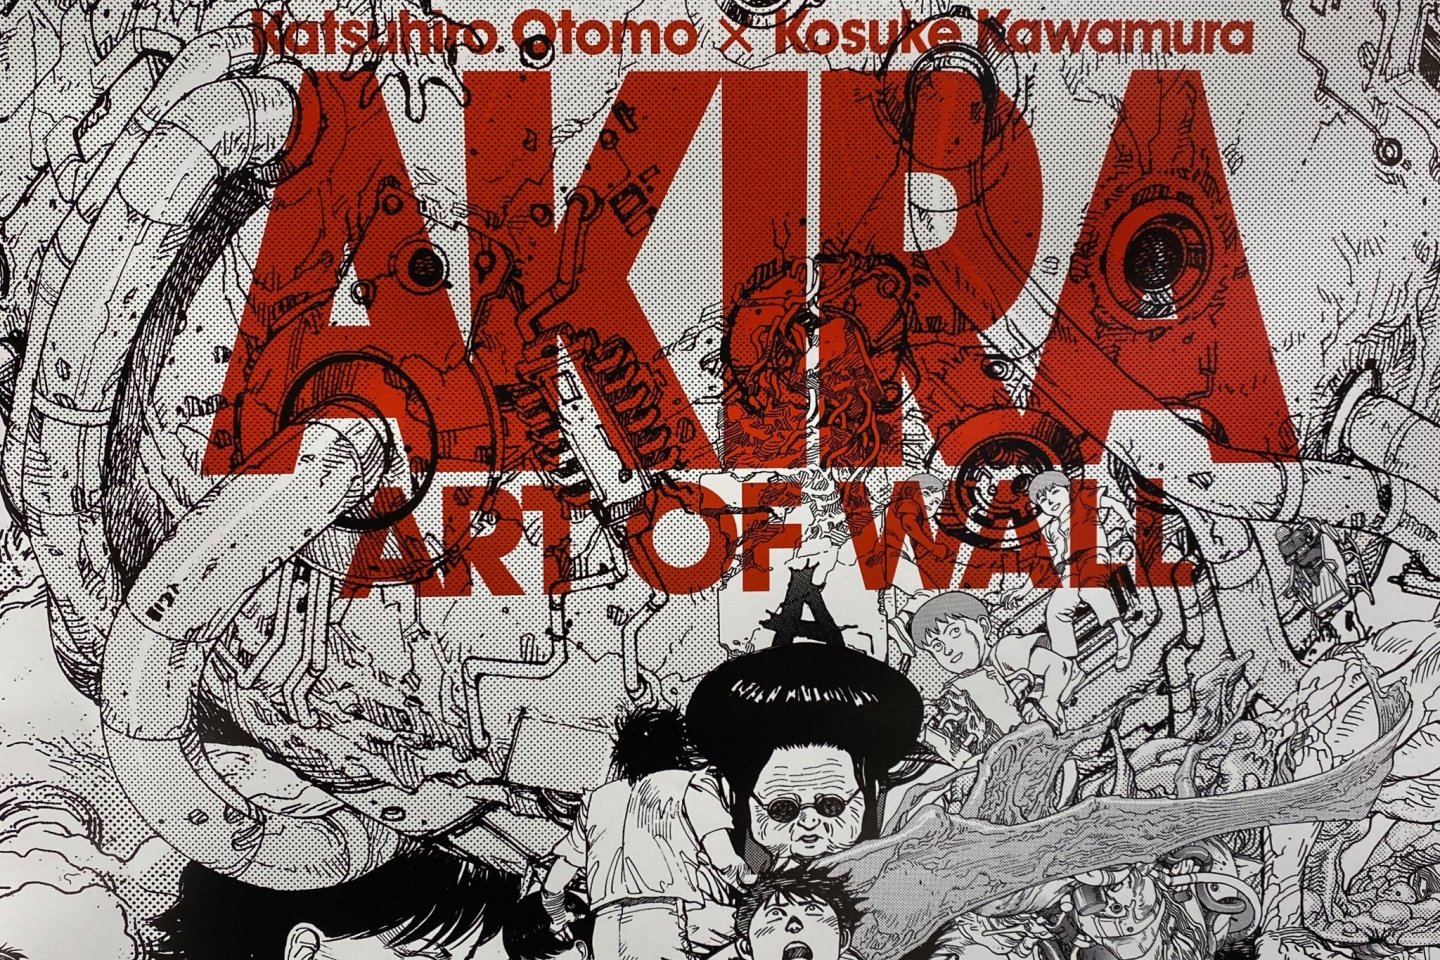 The Parco Museum exhibit is a tribute to the manga \'Akira\'